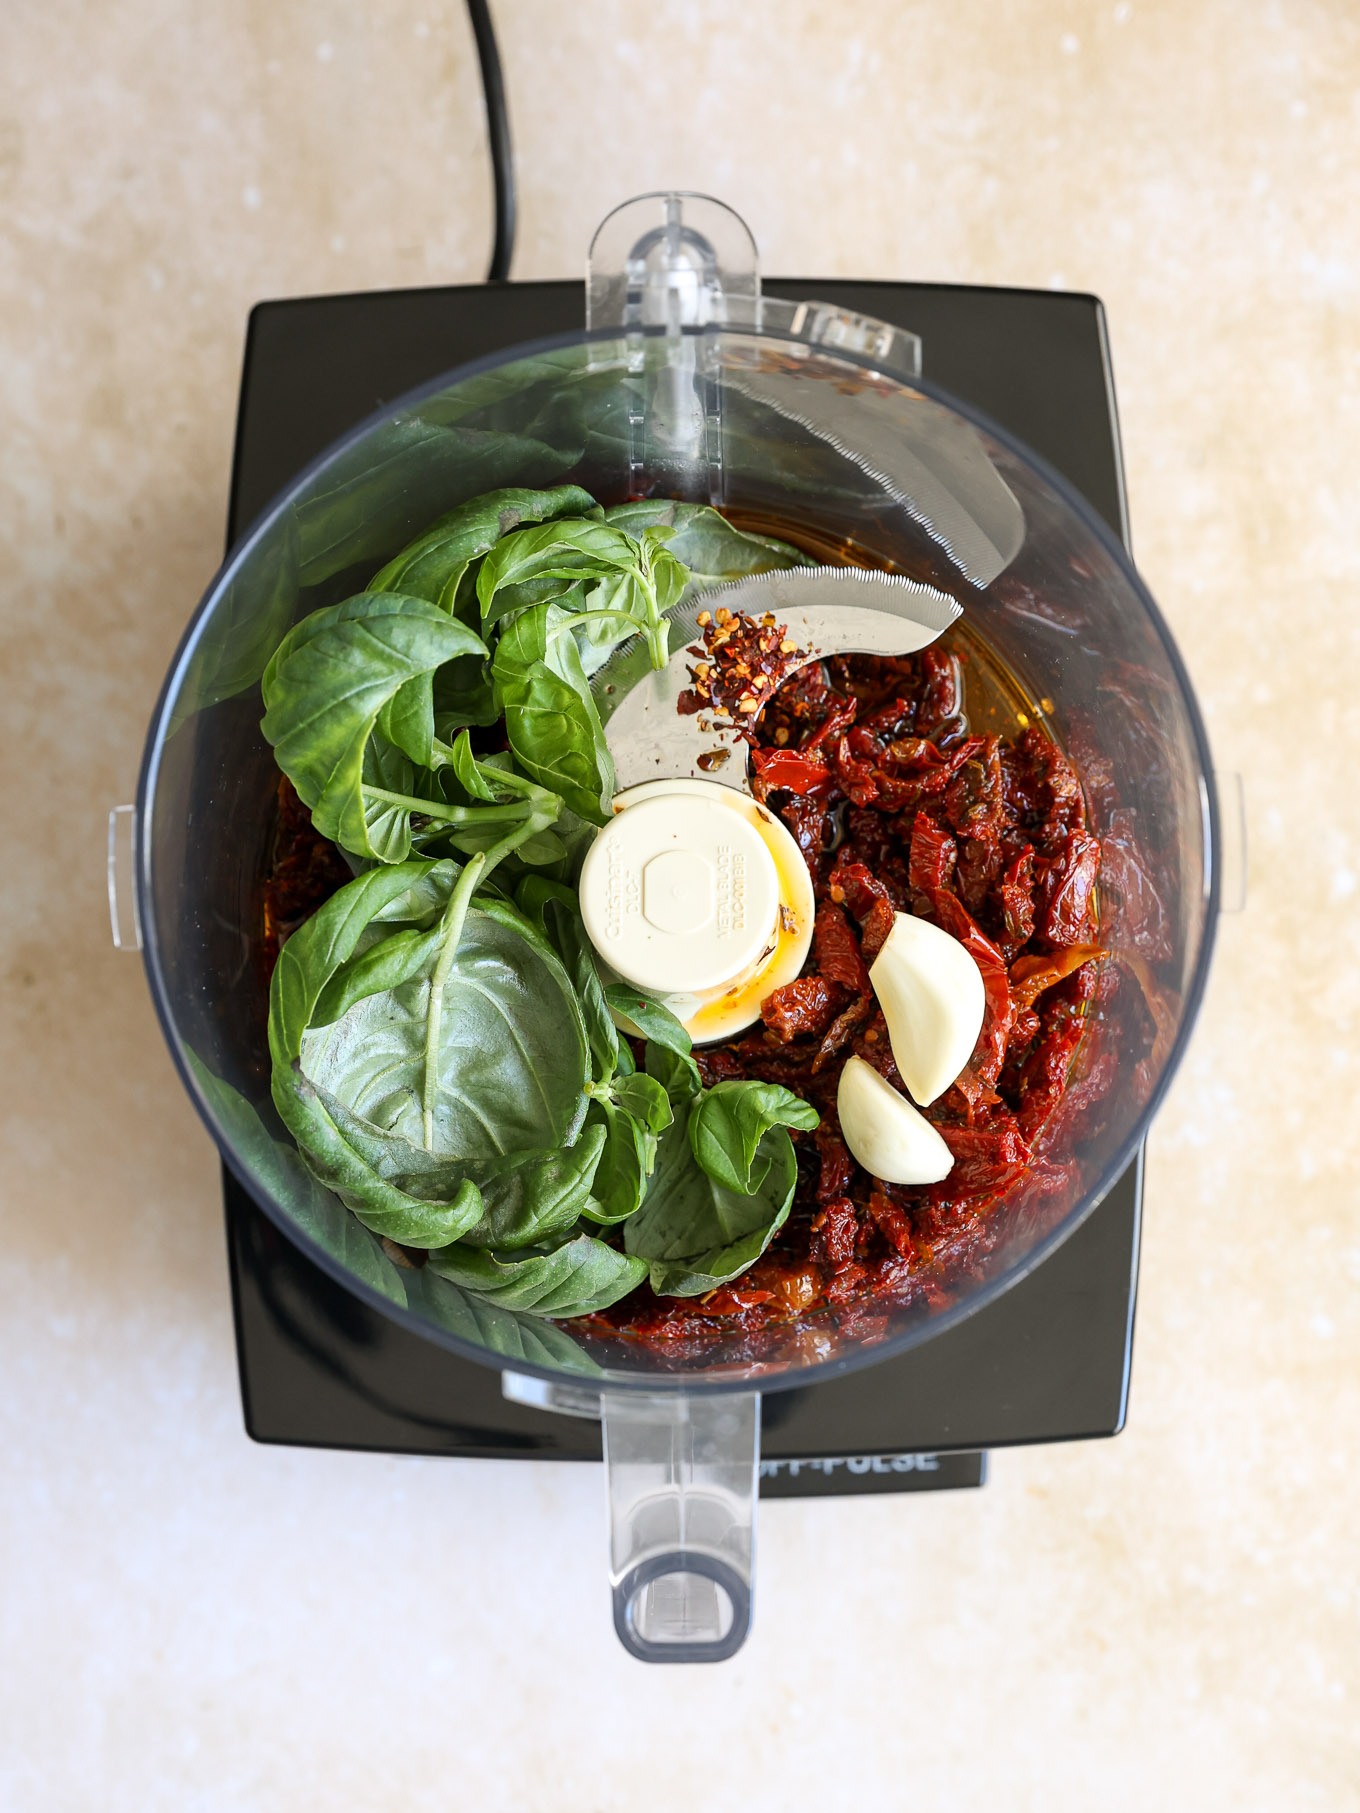 sun dried tomatoes with spinach and garlic in a food processor.